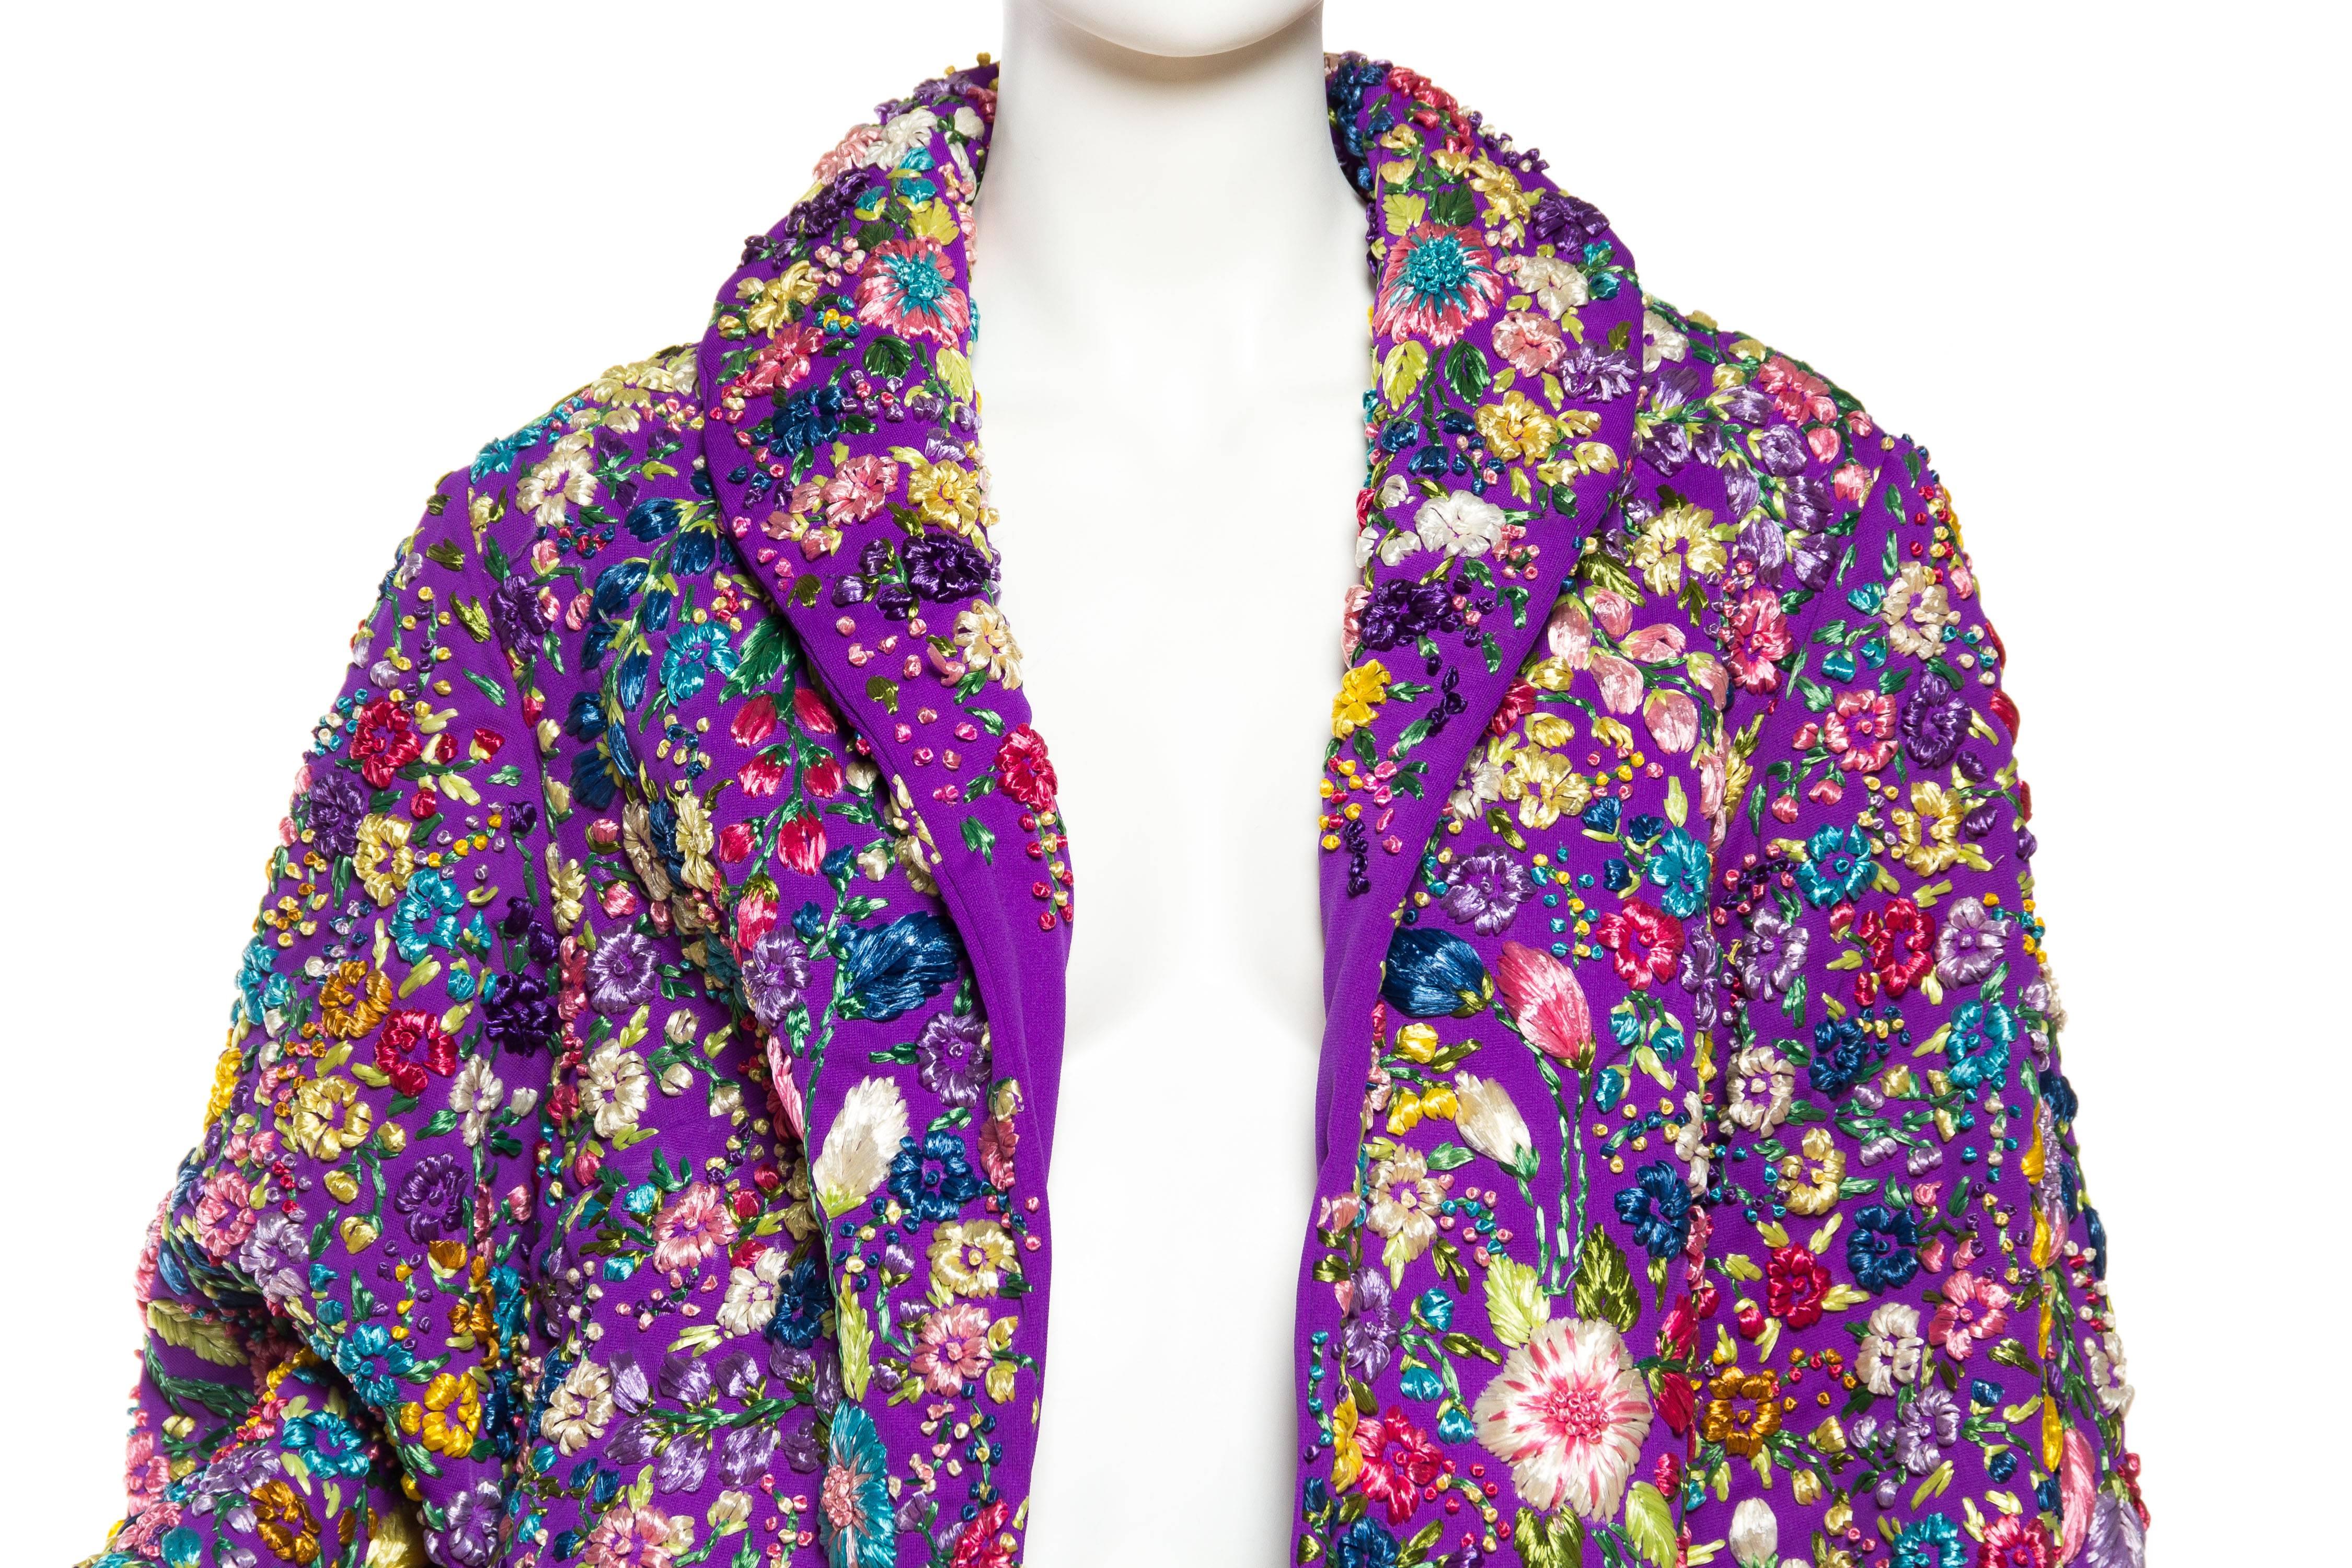 Phenomenal Fully Embroidered Gucci Like Floral Coat 1